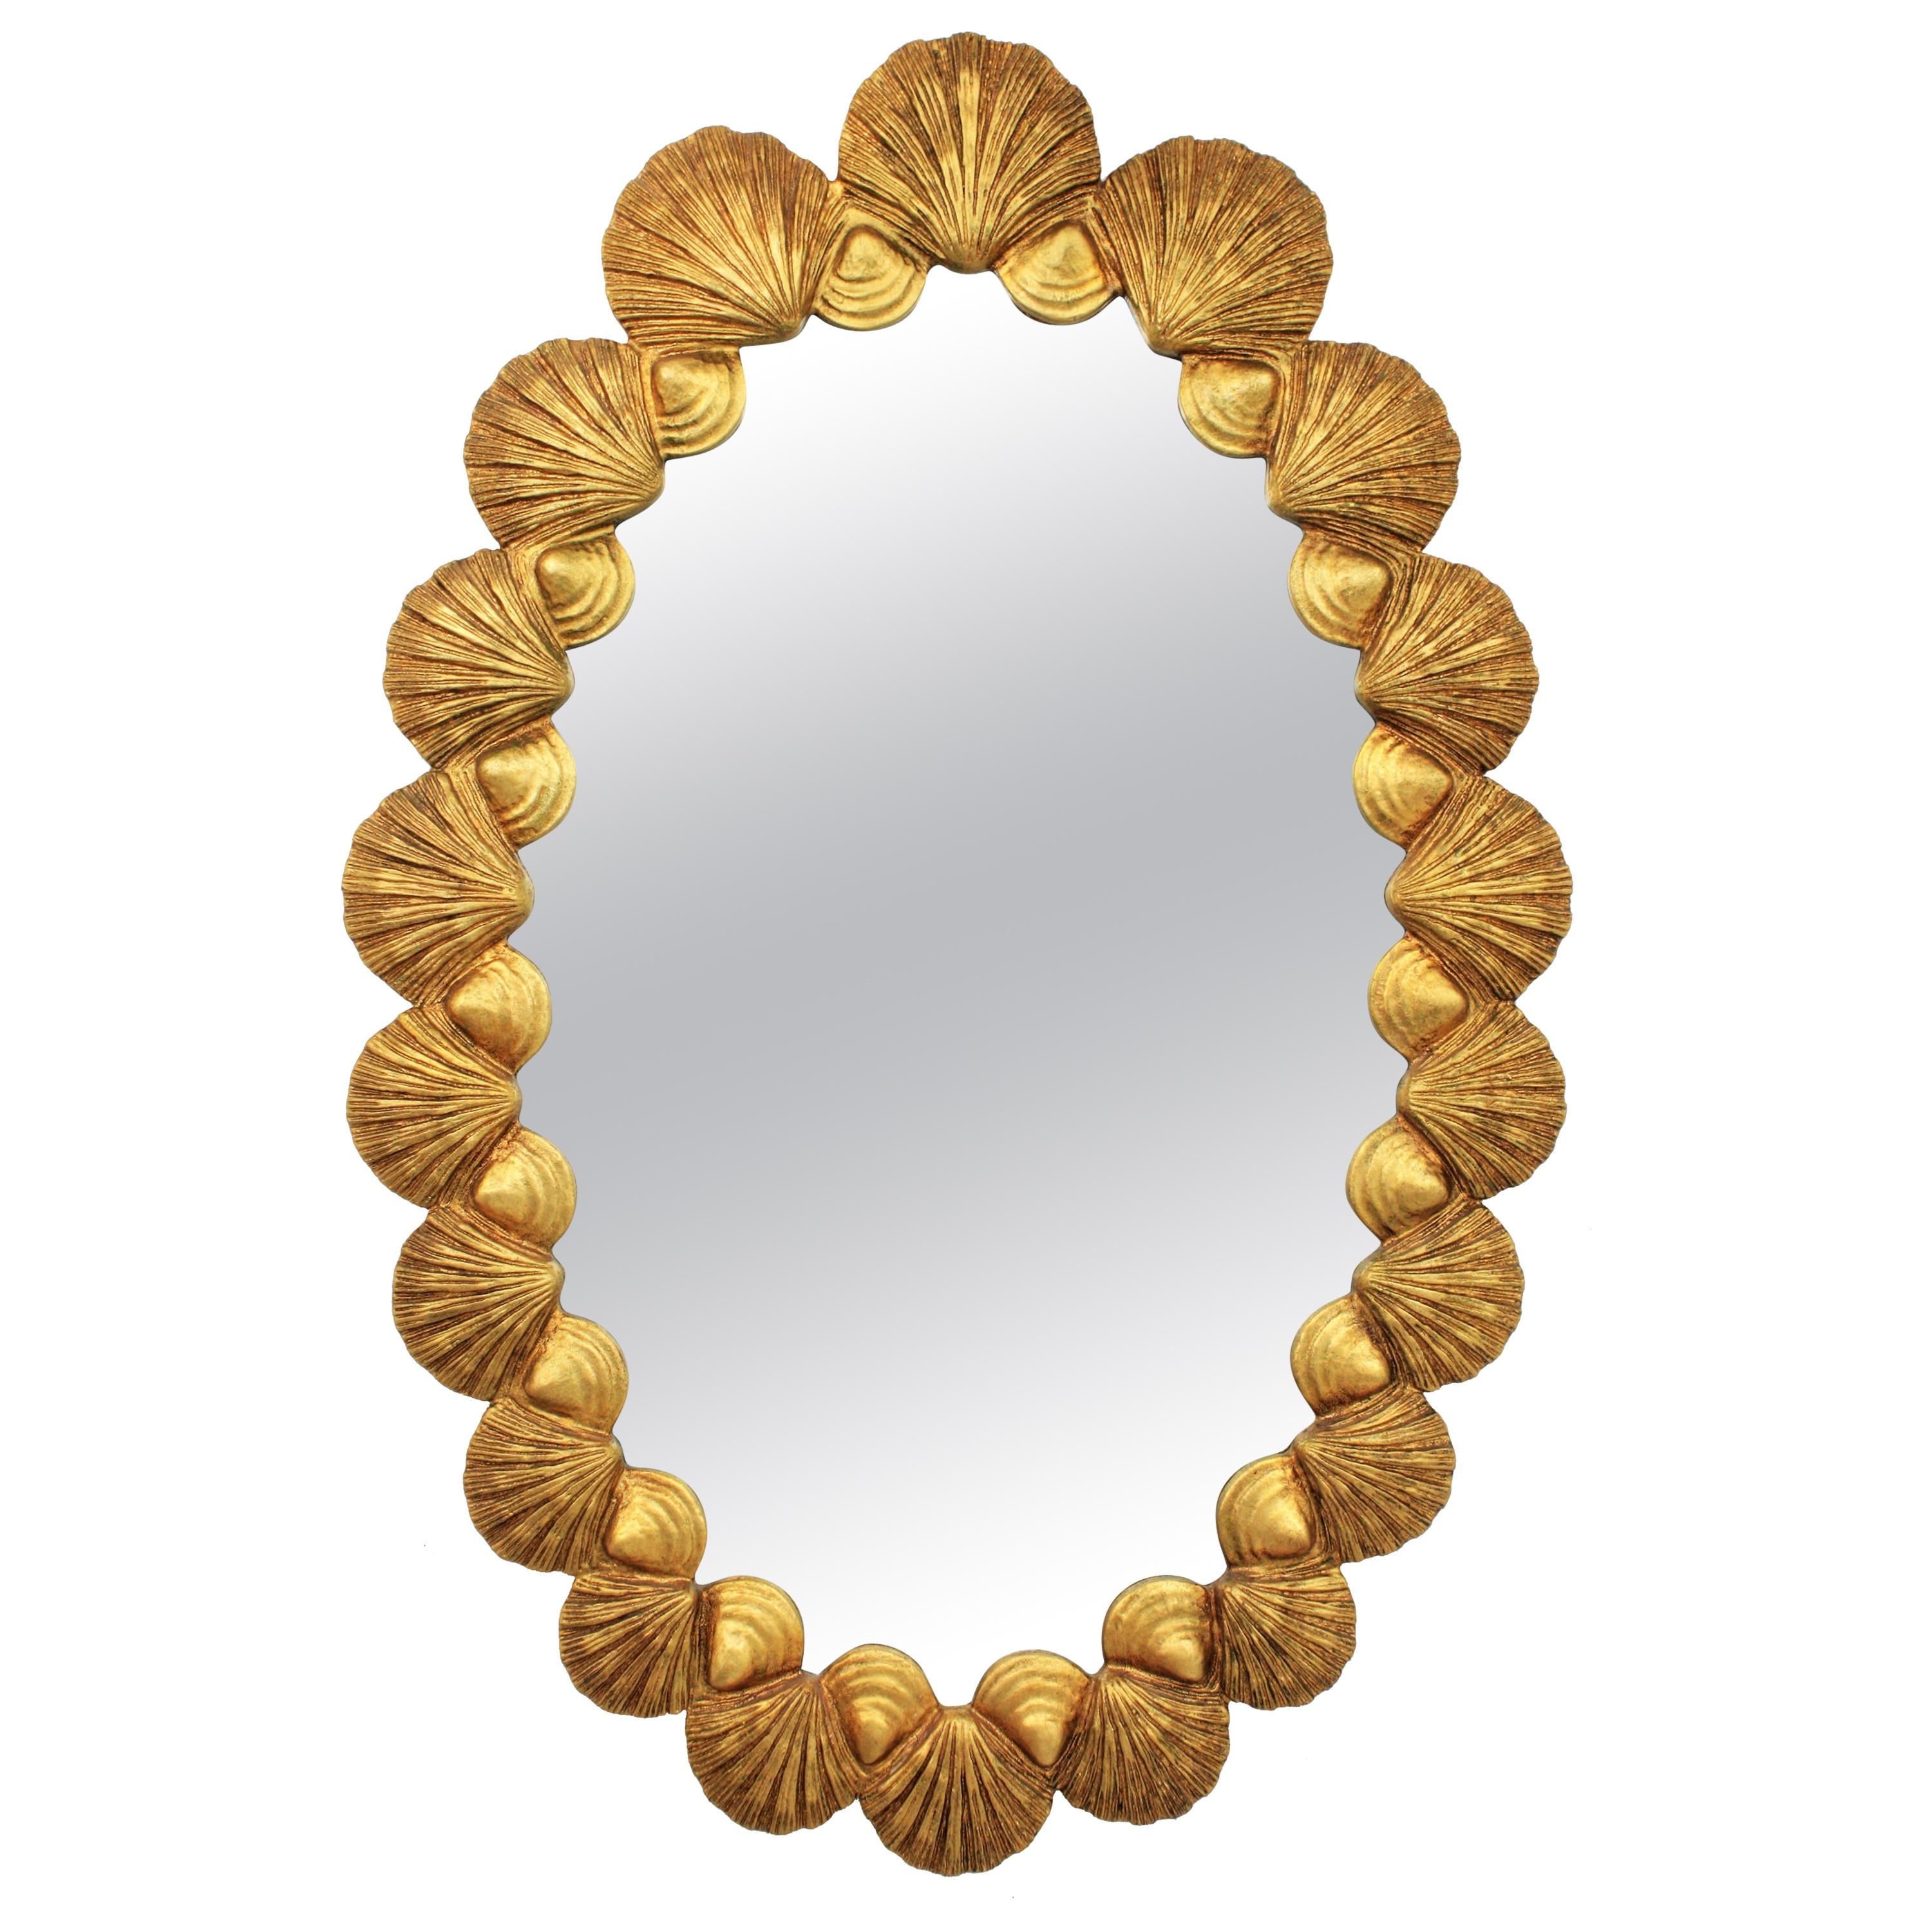 Hollywood Regency giltwood oval mirror with carved shells frame by Francisco Hurtado, Spain, 1950s
One of a kind finely carved oval large mirror with an exquisite hand carved shell motif frame.
This mirror was handcrafted at the Mid-Century Modern